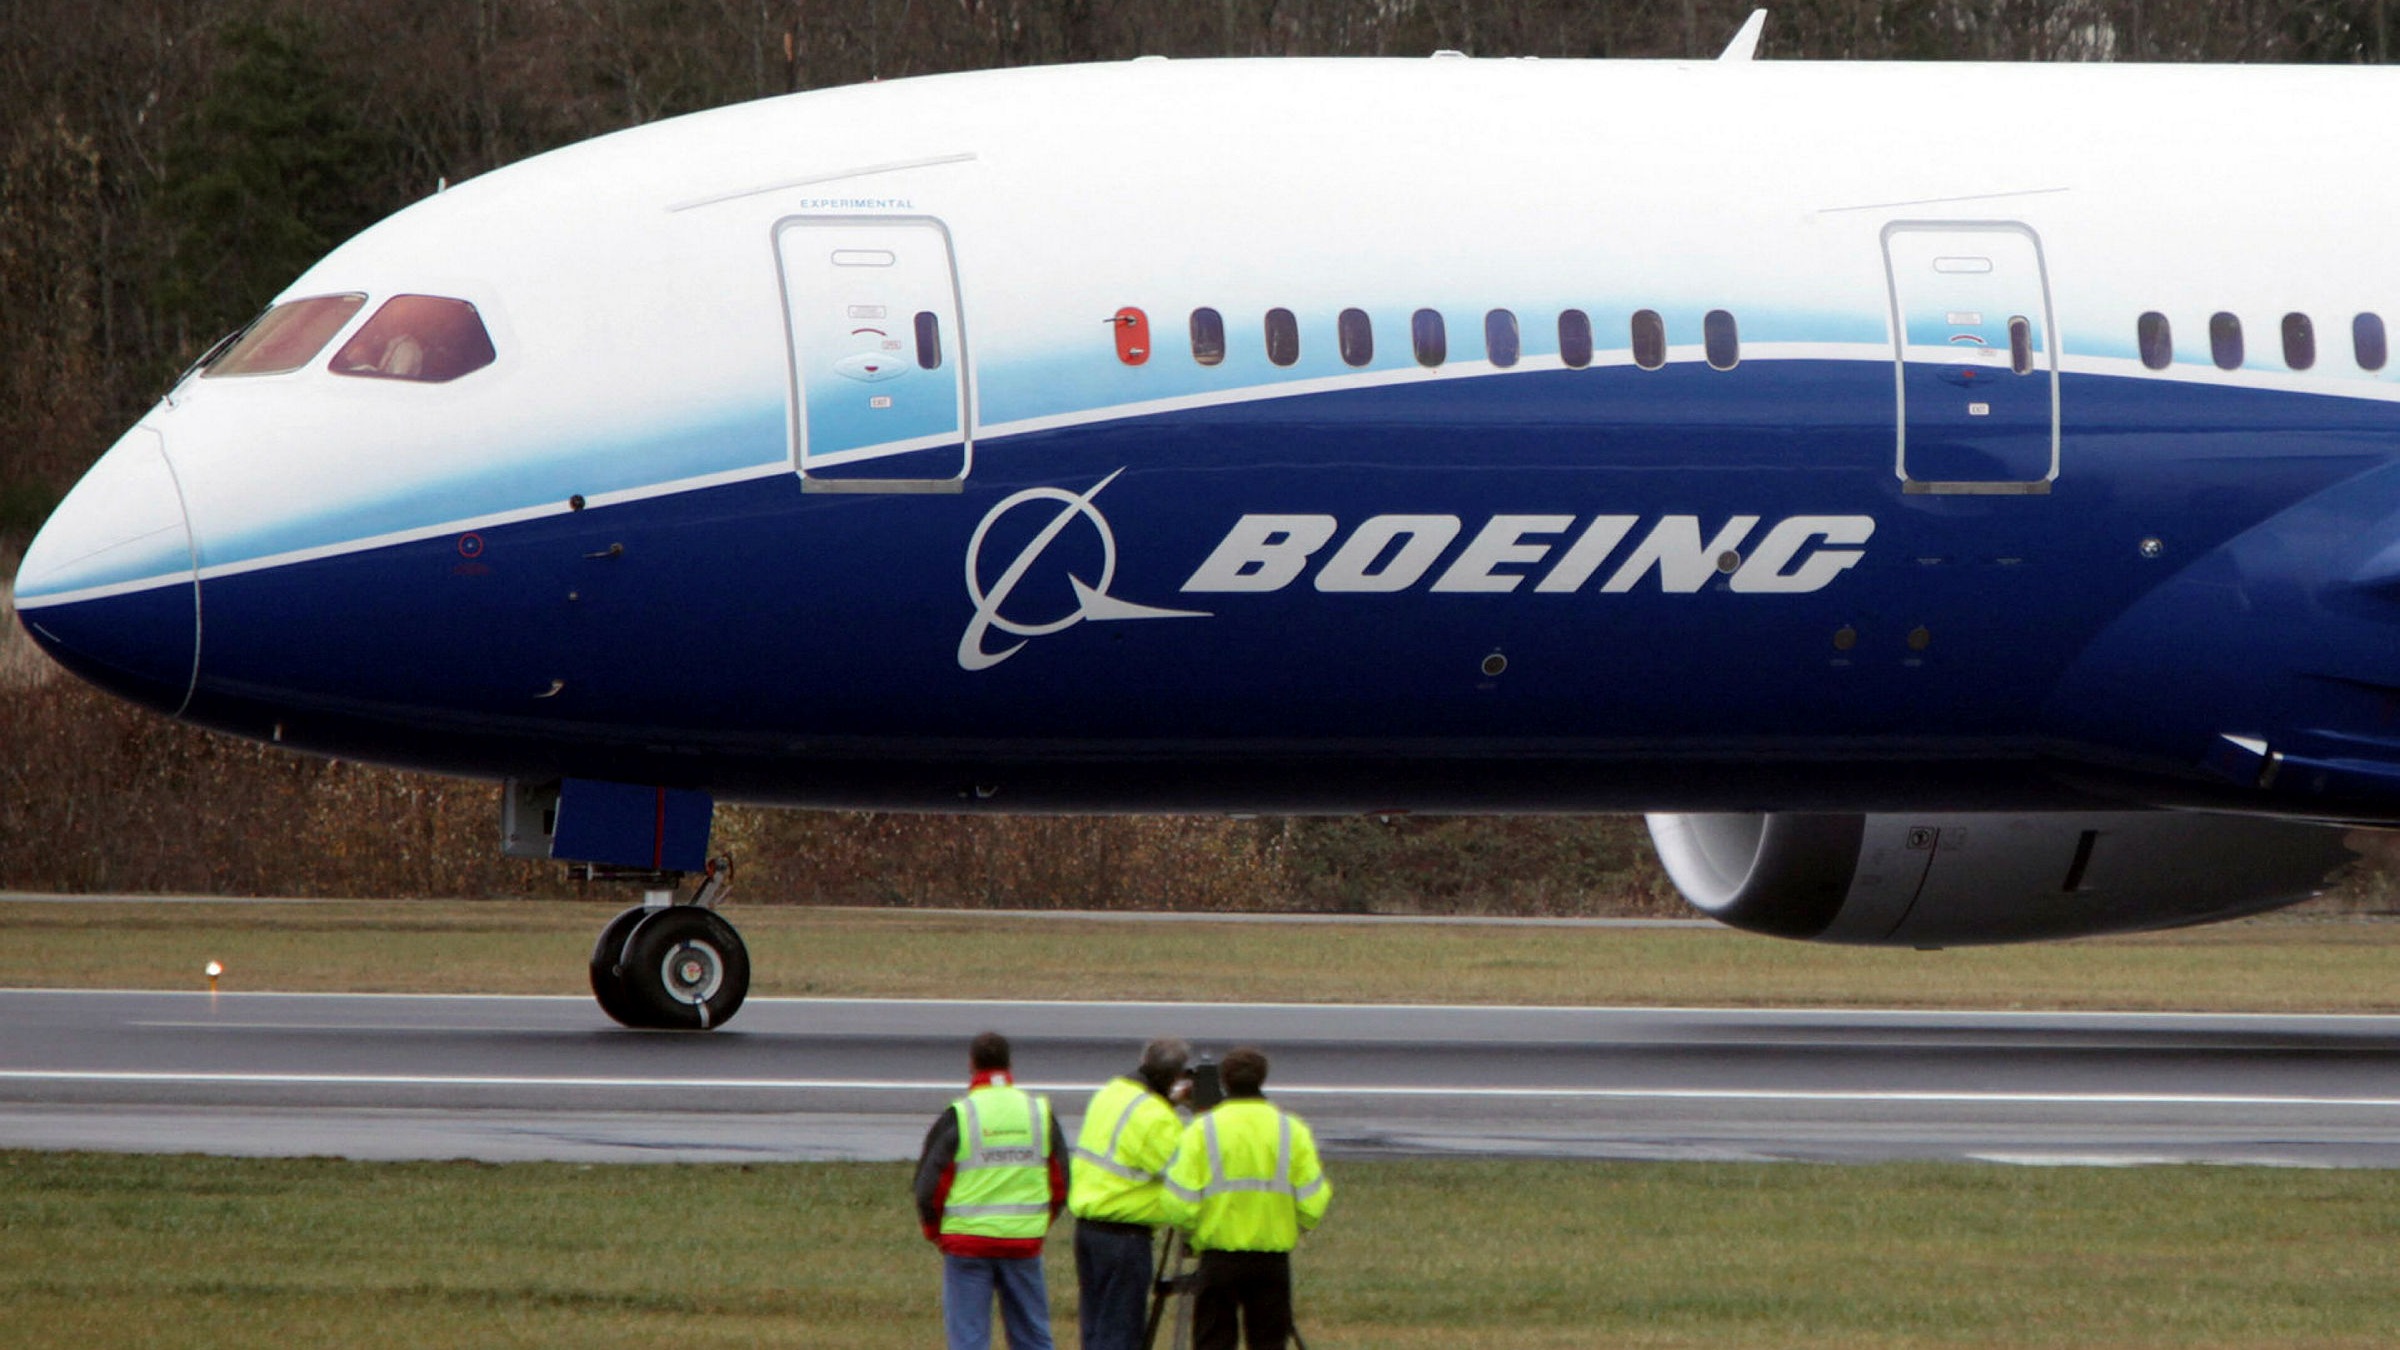 Boeing discovers new issues with 737 Max and warns of delays